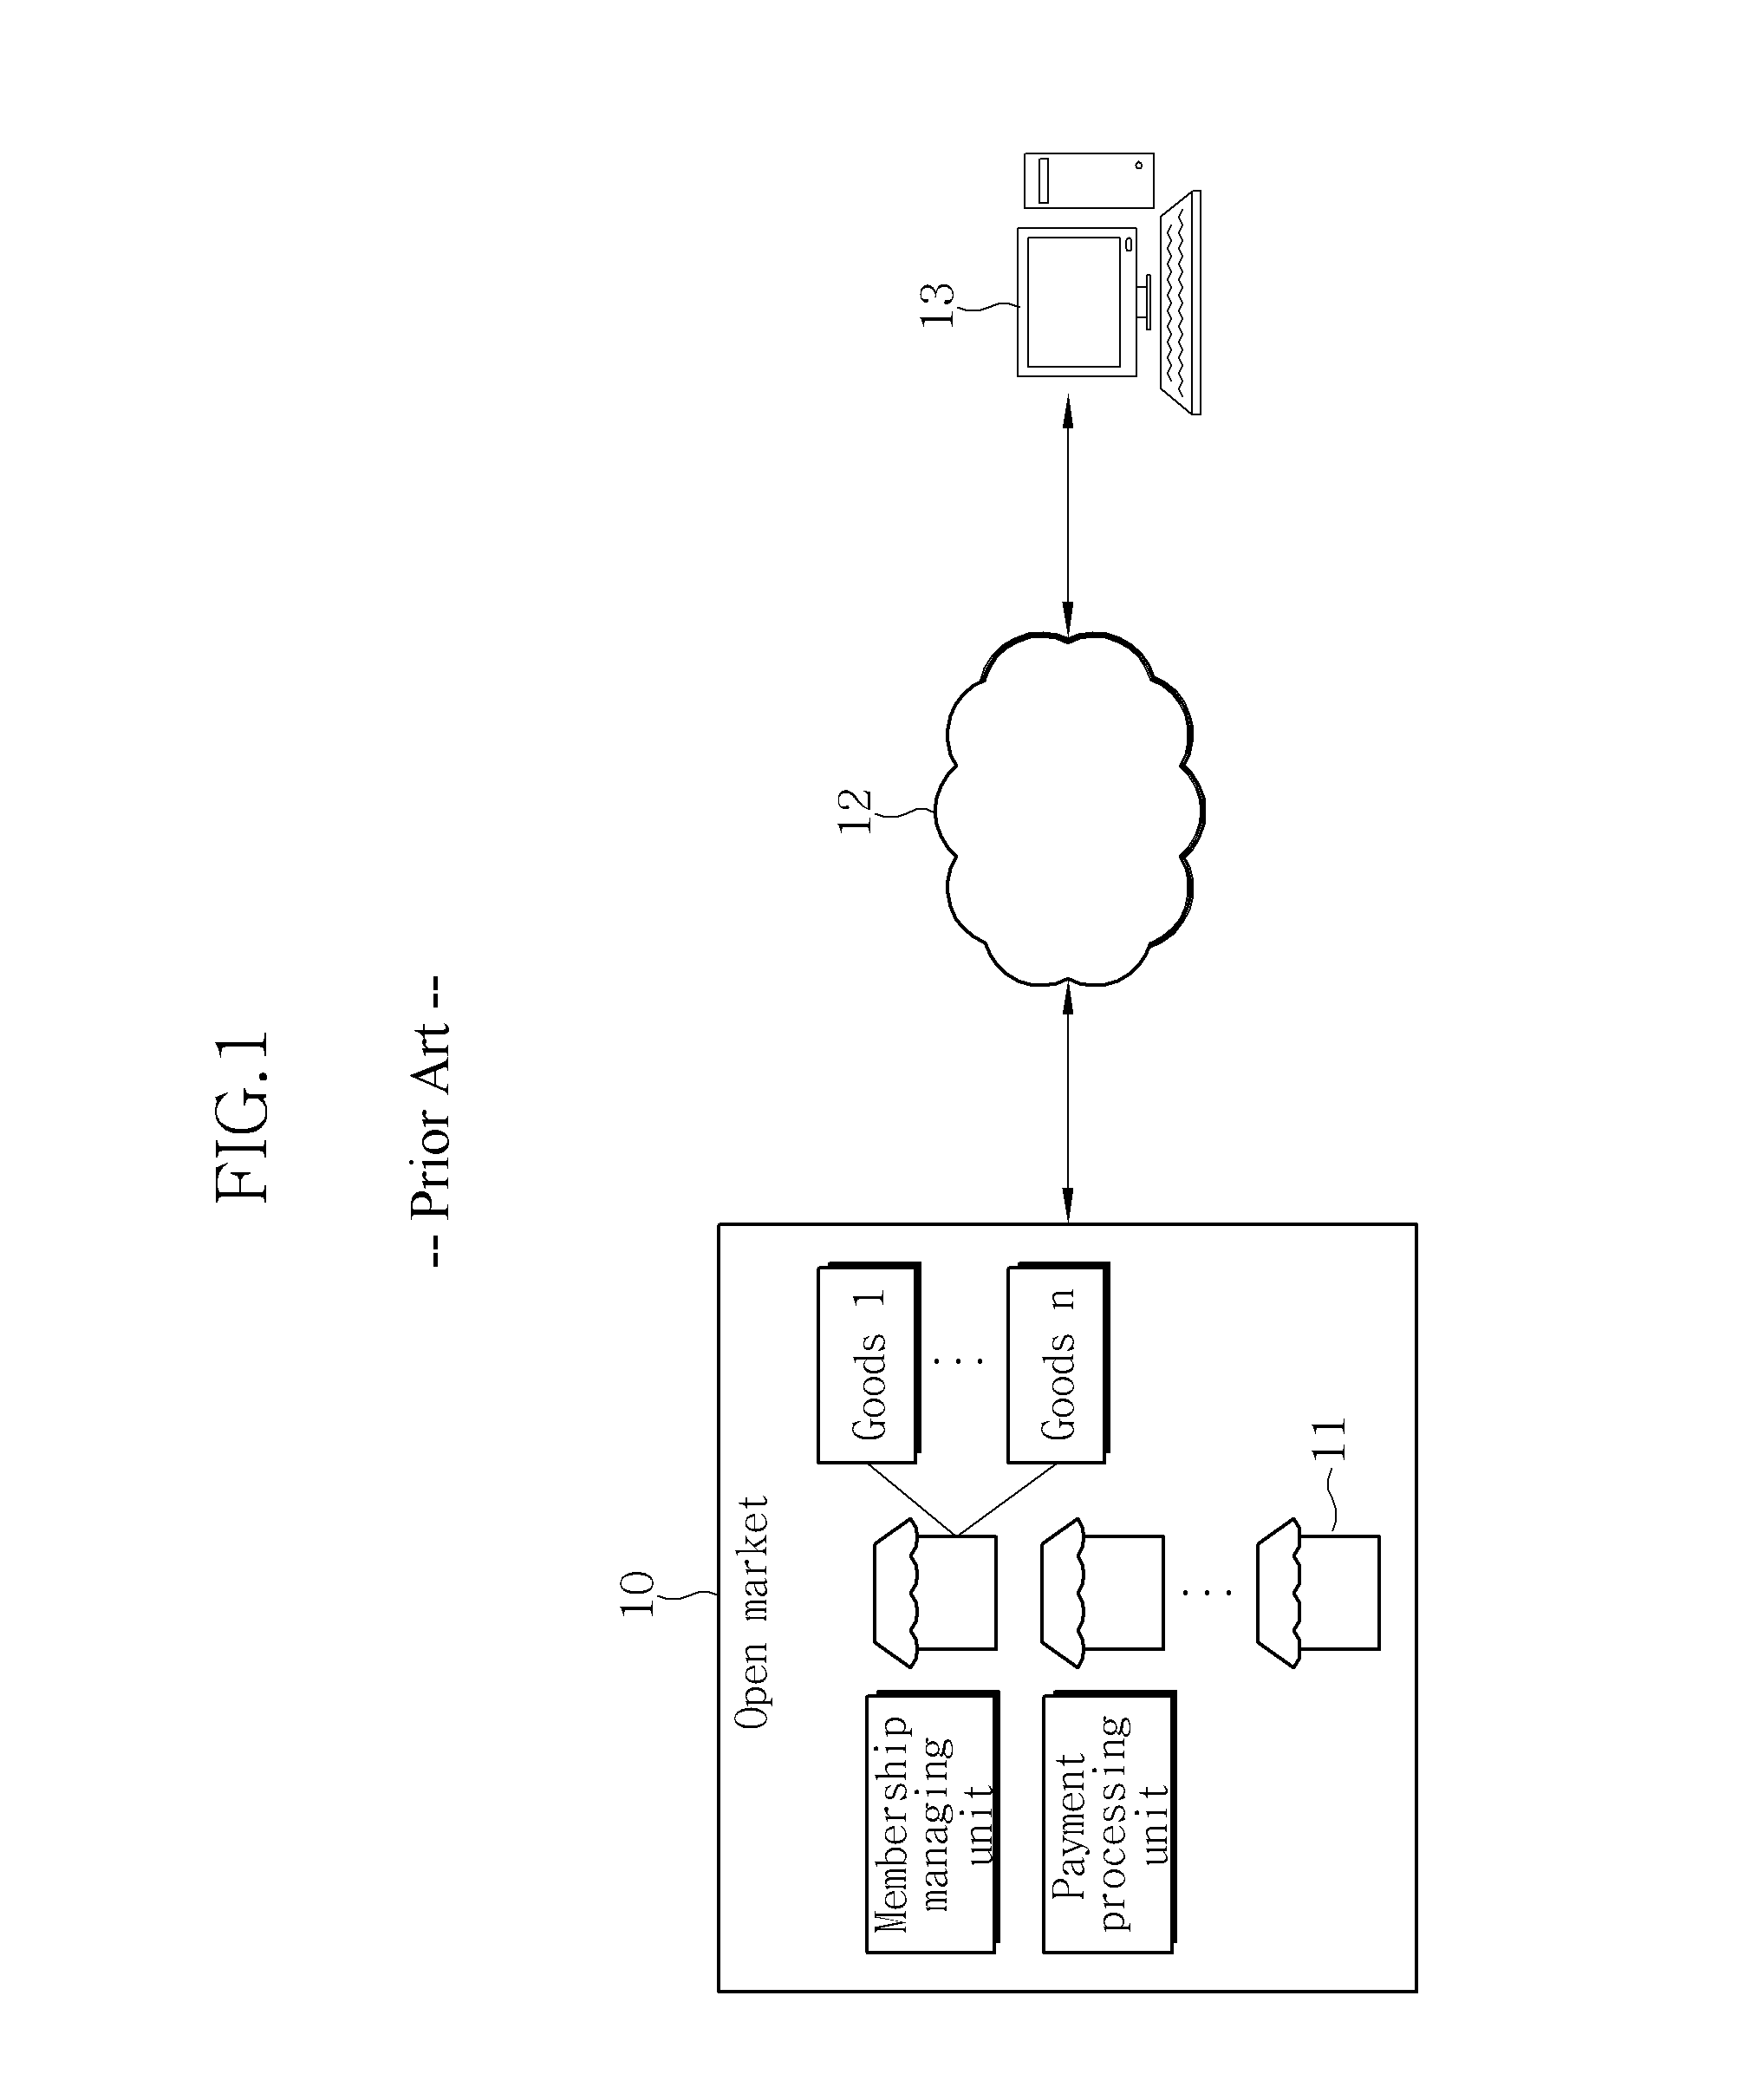 System and method for proxy shopping through multiple payments